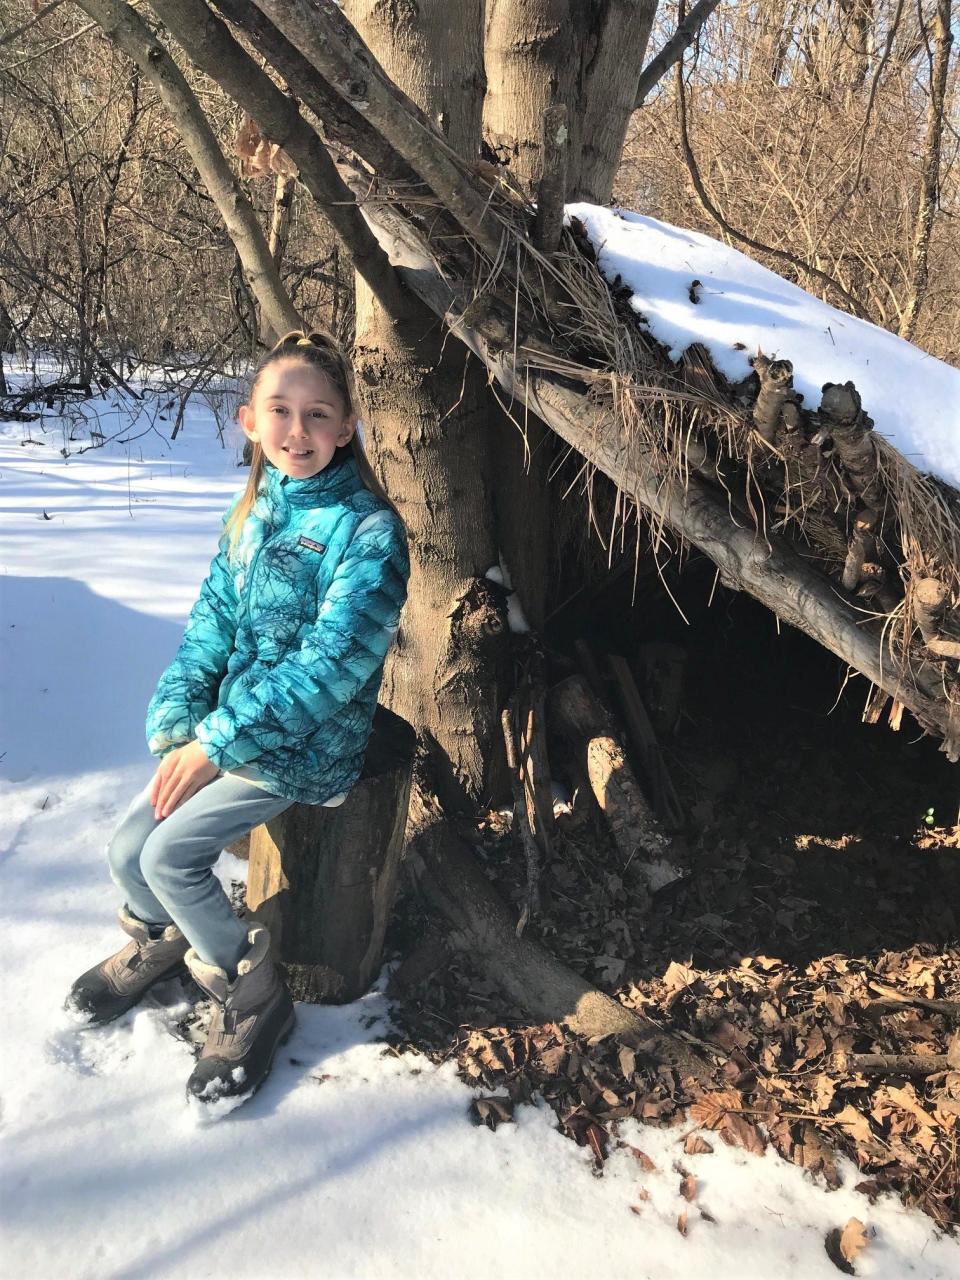 Kiala Dean, 11, sits beside a shelter made of wood she built in her family's 11-acre property.